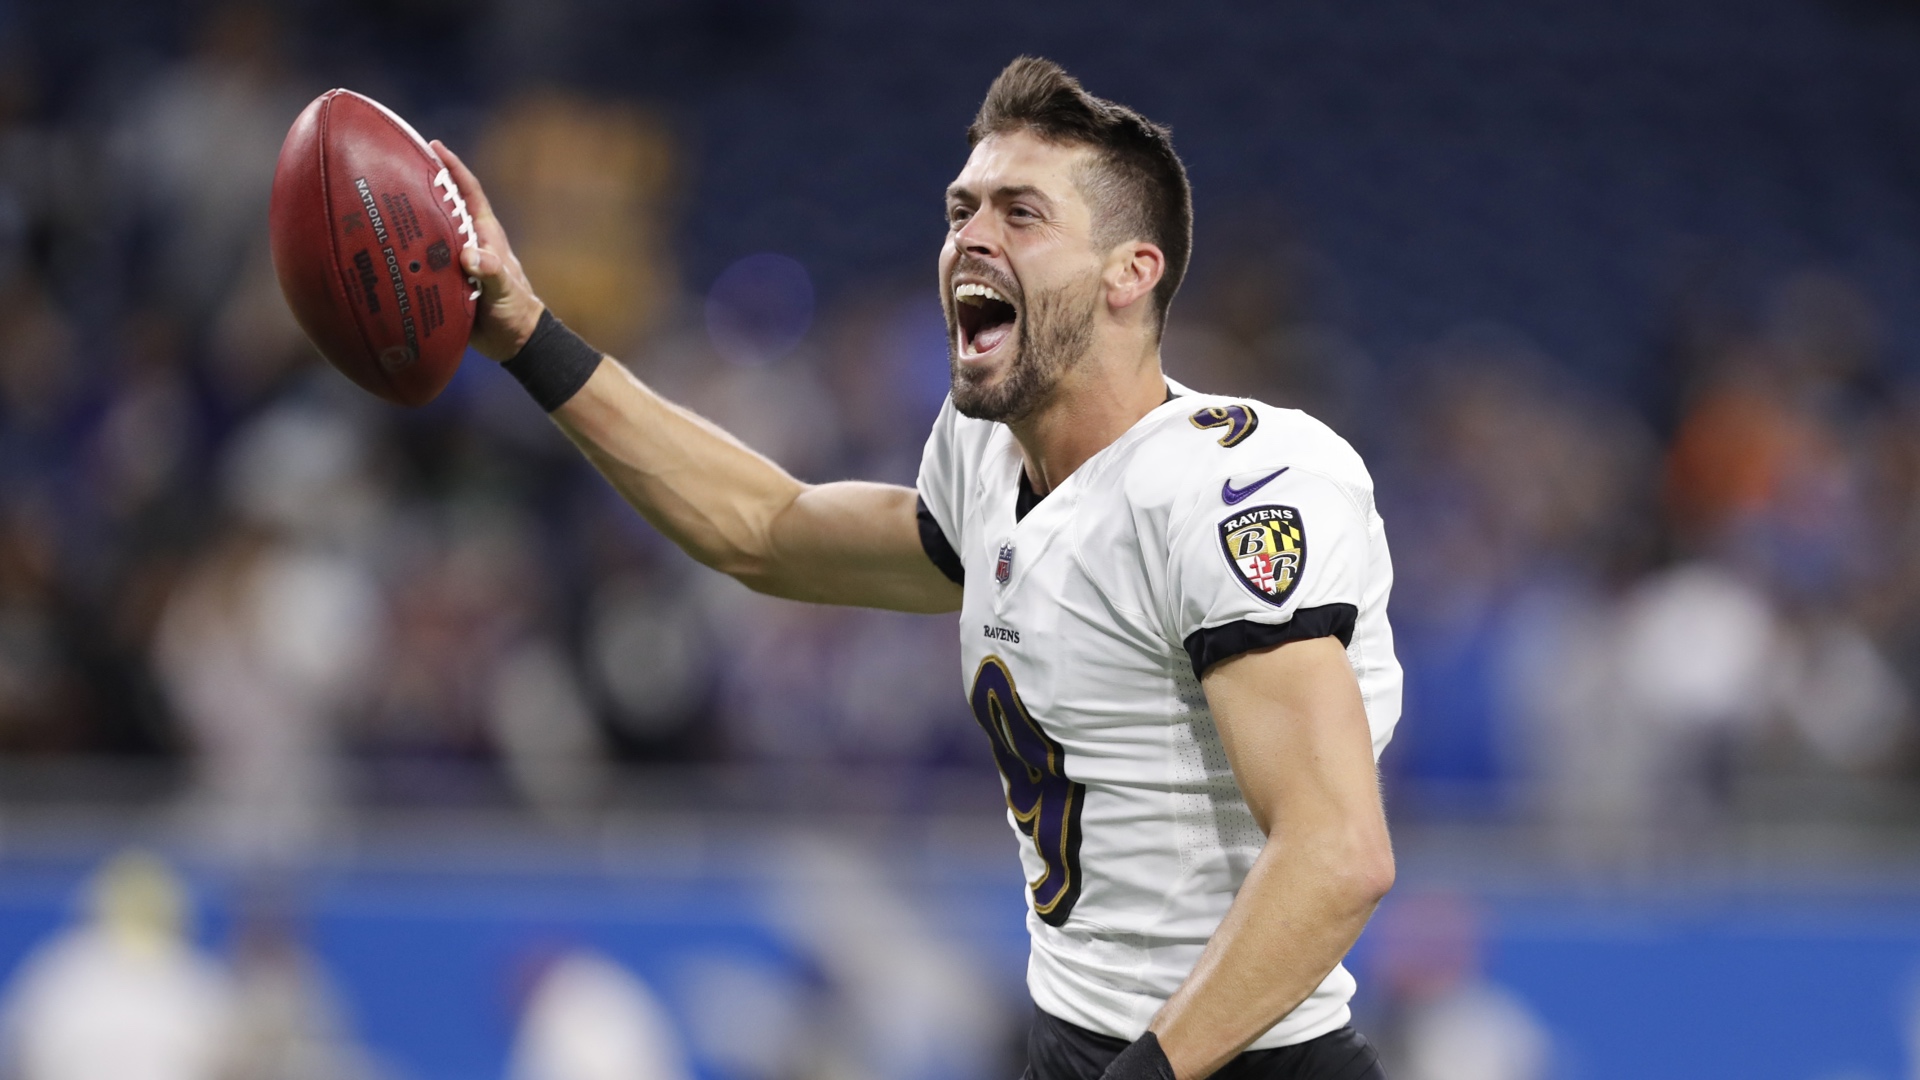 Ravens Justin Tucker uses his head as vaccination for NFL kicking plague   Sporting News